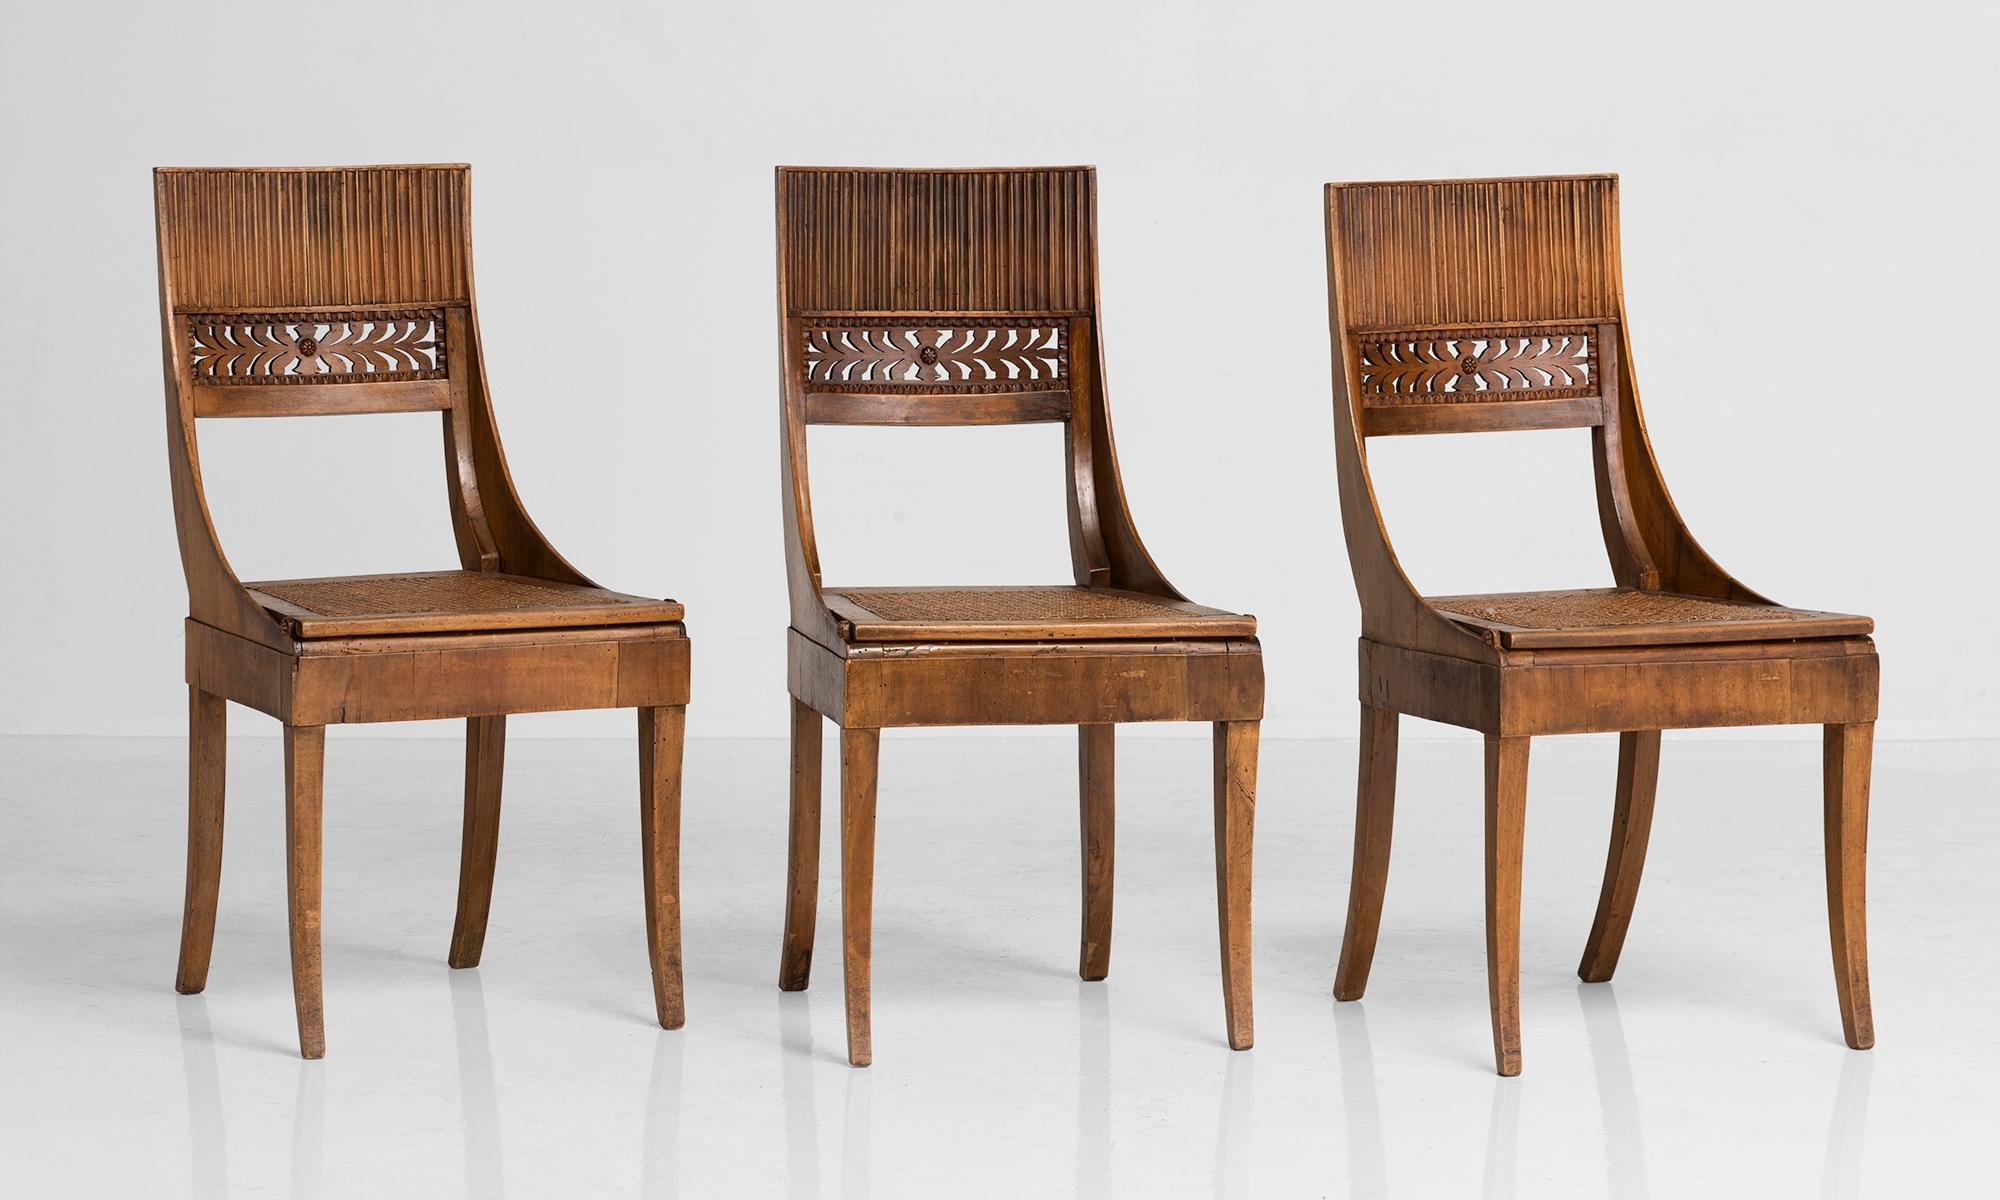 Fruitwood dining chairs with hand carved details and woven cane seat.